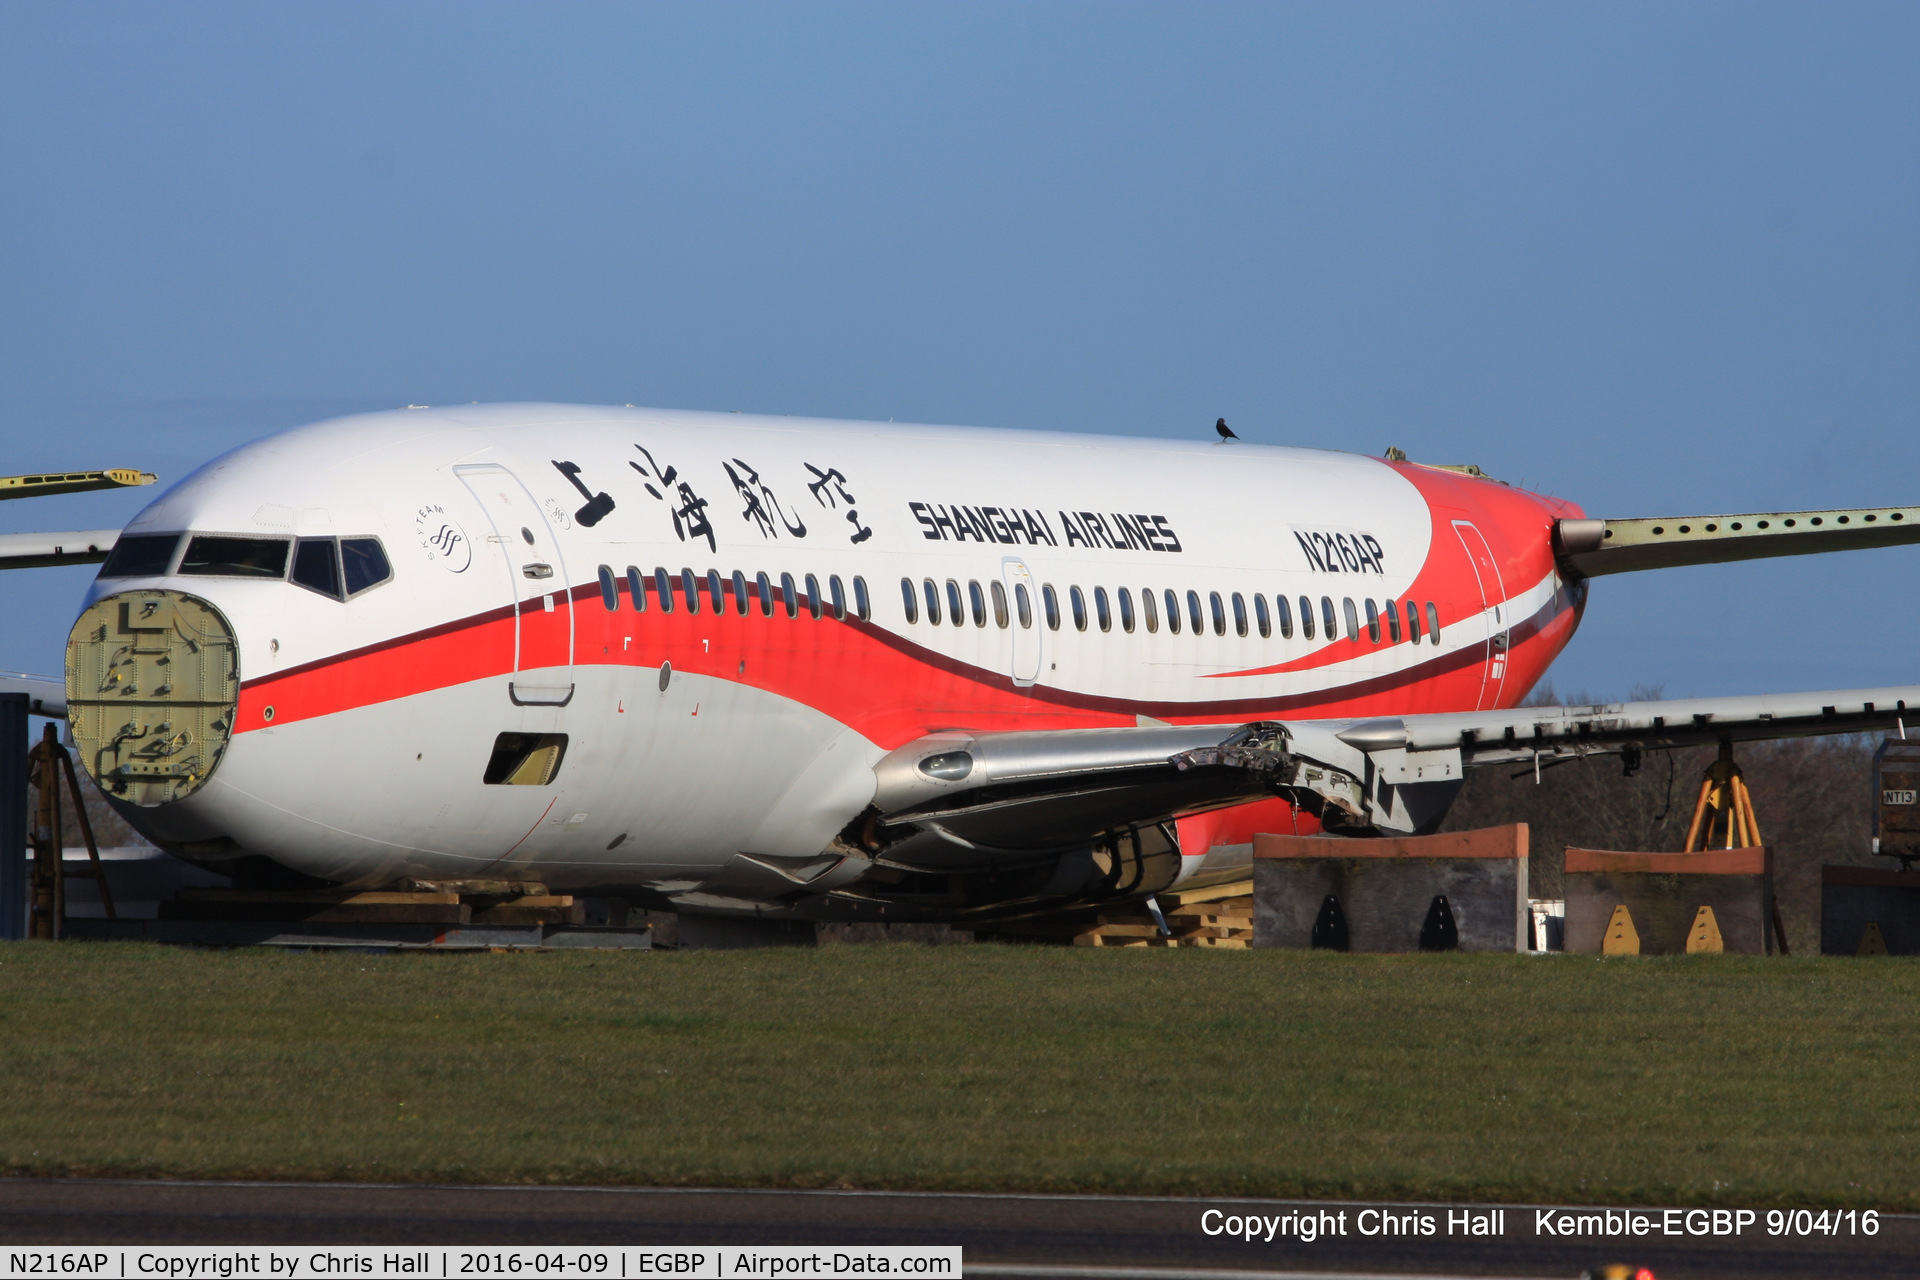 N216AP, 1998 Boeing 737-7Q8 C/N 28216, ex Shanghai Airlines in the scrapping area at Kemble